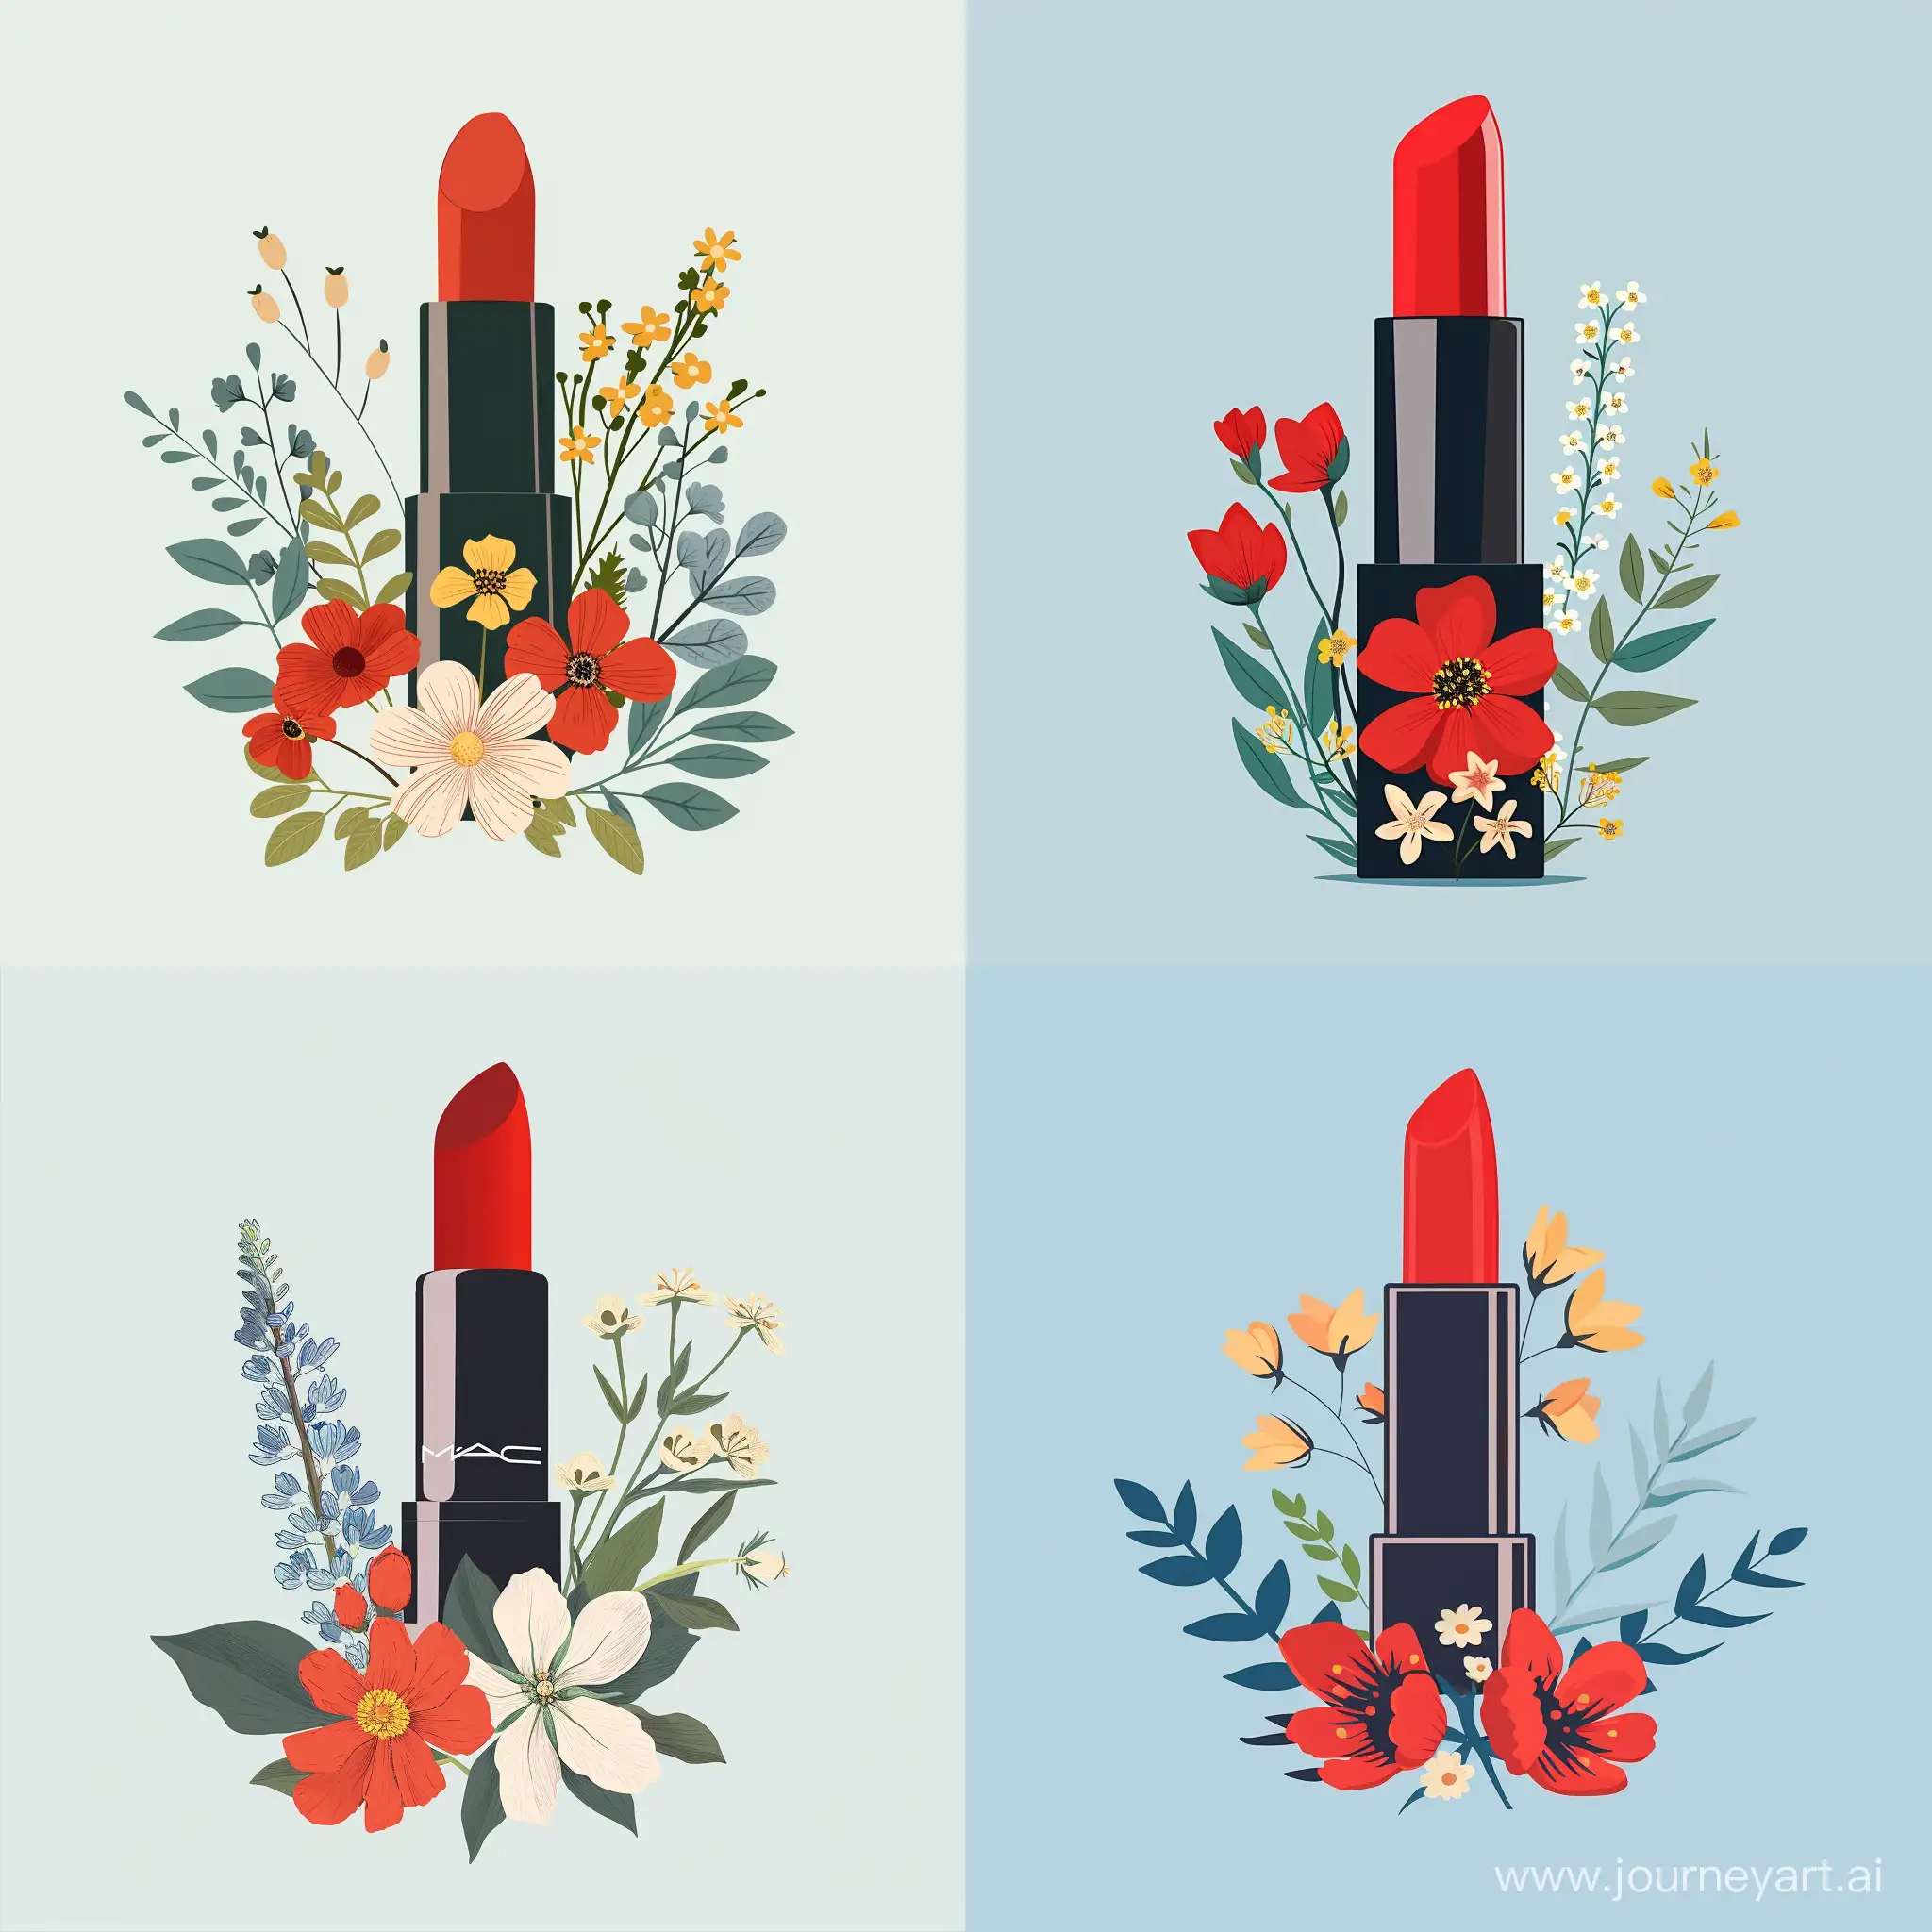 Botanical-Fashion-Illustration-Red-Lipstick-with-Floral-Accents